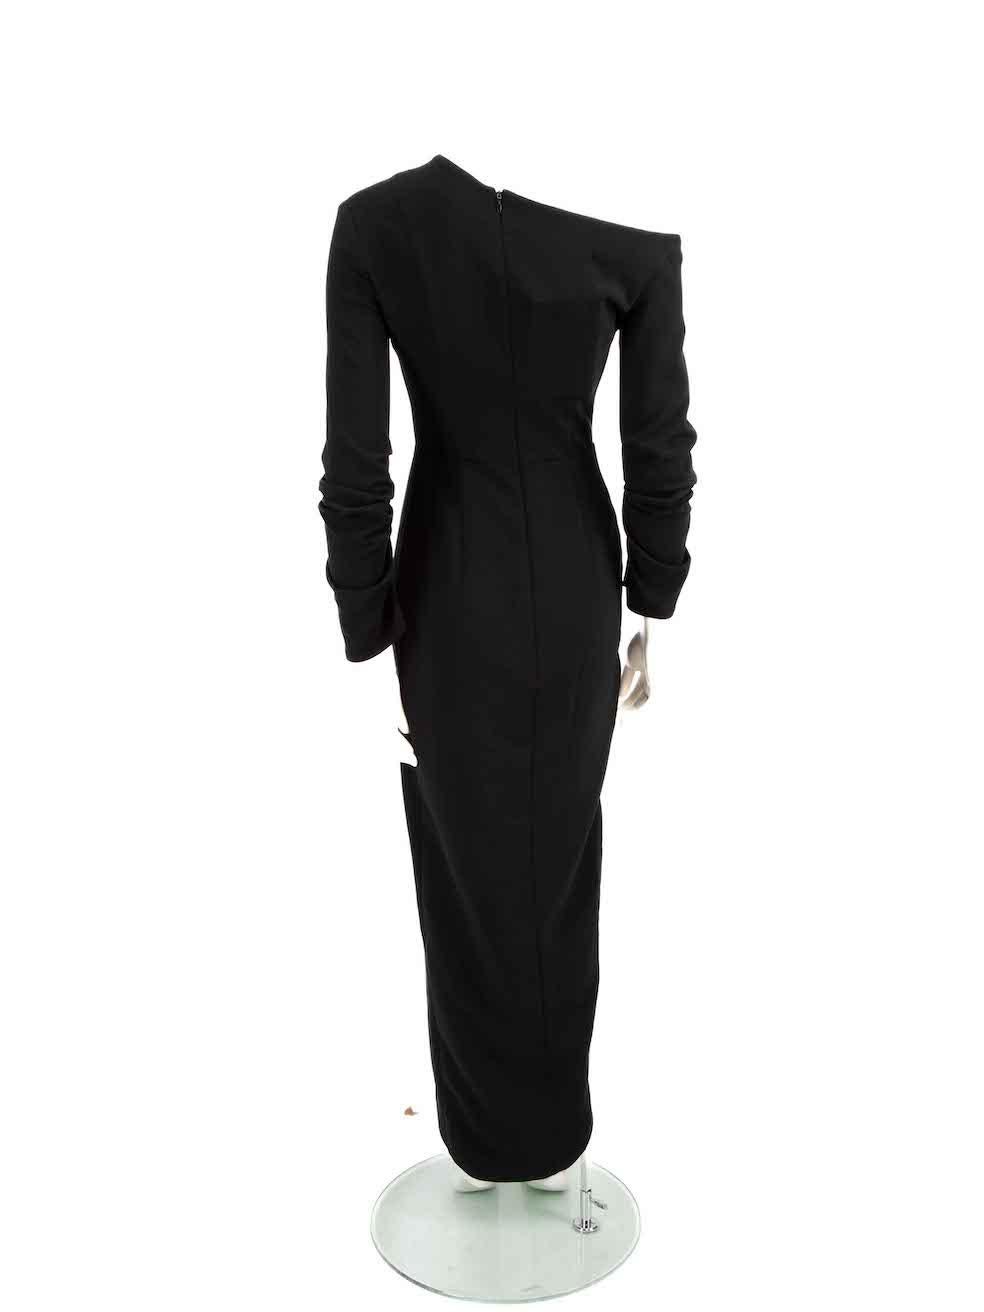 A.W.A.K.E. MODE Black Asymmetric Ruched Sleeve Dress Size S In New Condition For Sale In London, GB